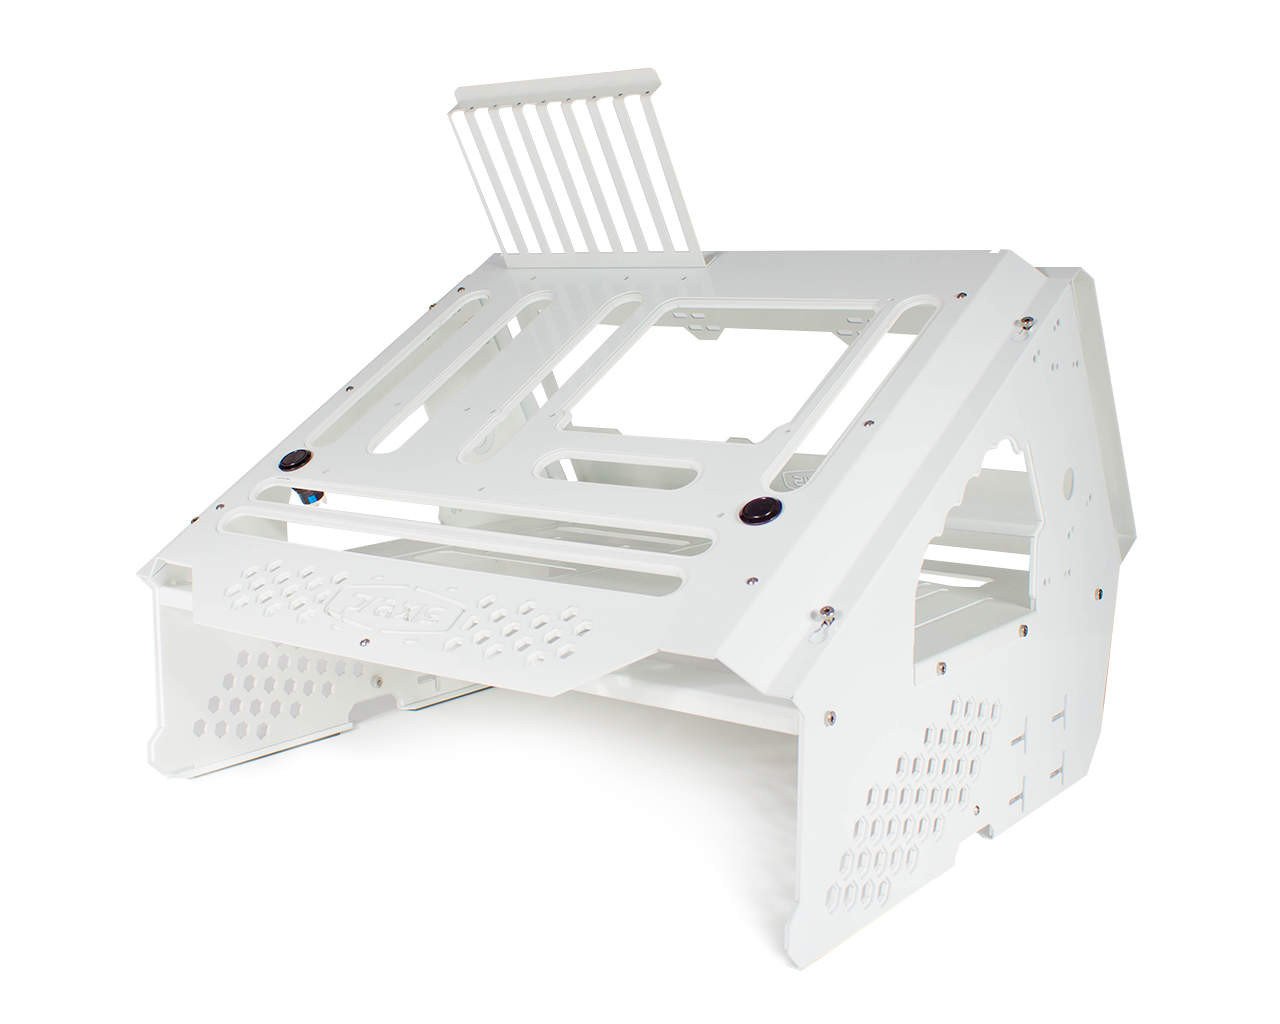 PrimoChill's Praxis Wetbench Powdercoated Steel Modular Open Air Computer Test Bench for Watercooling or Air Cooled Components - PrimoChill - KEEPING IT COOL White w/White Accents